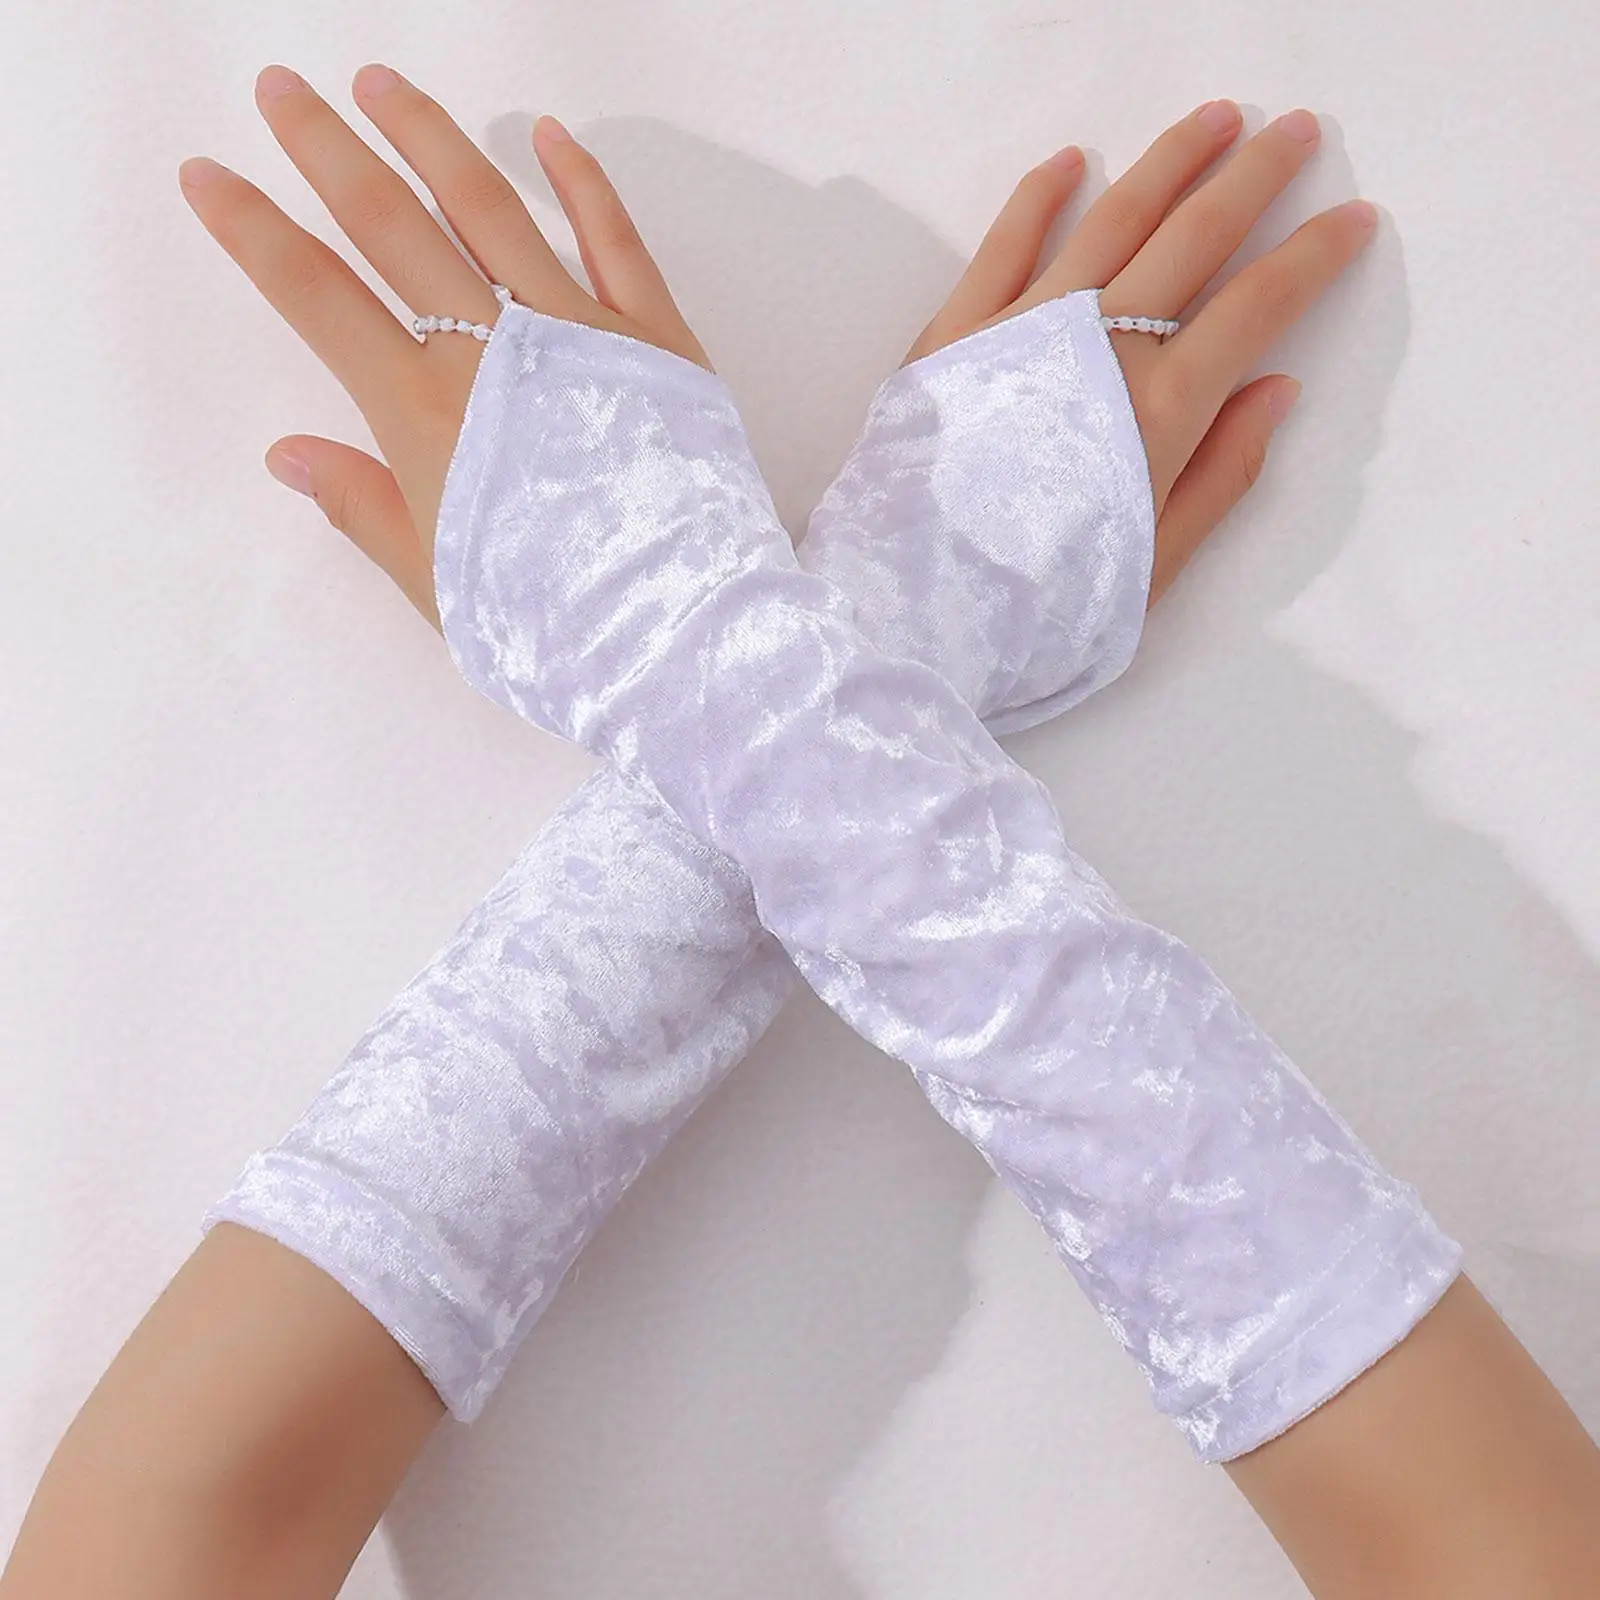 Classic Fingerless Gloves Arm Warmers Sun Protection Costume Accessory Soft Women Arm Sleeves for Outdoor Activities Party